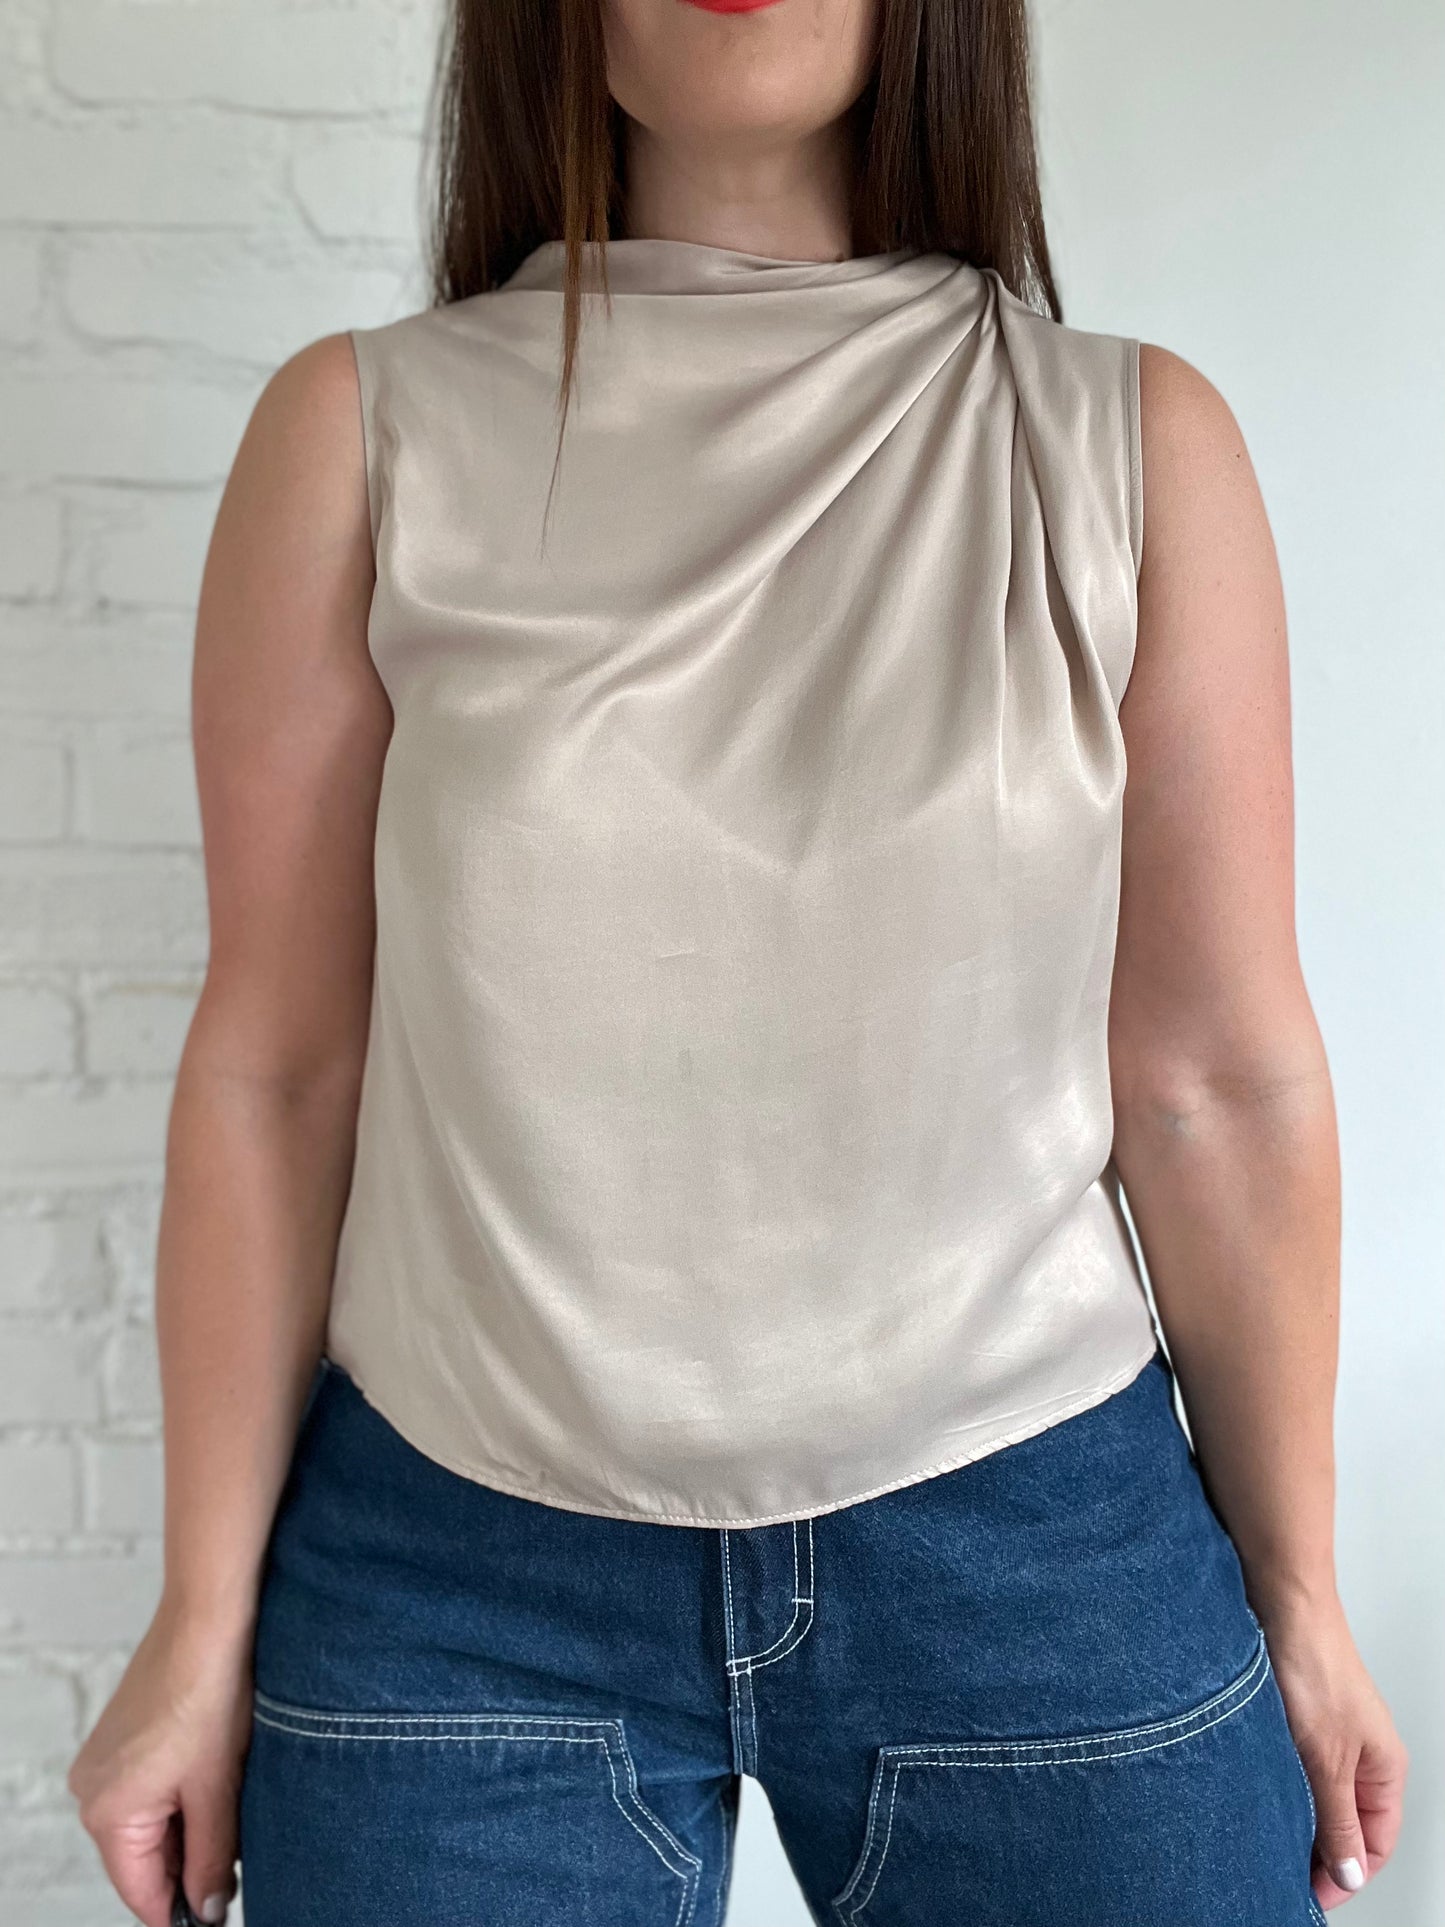 Ruched Satin Effect Top - L